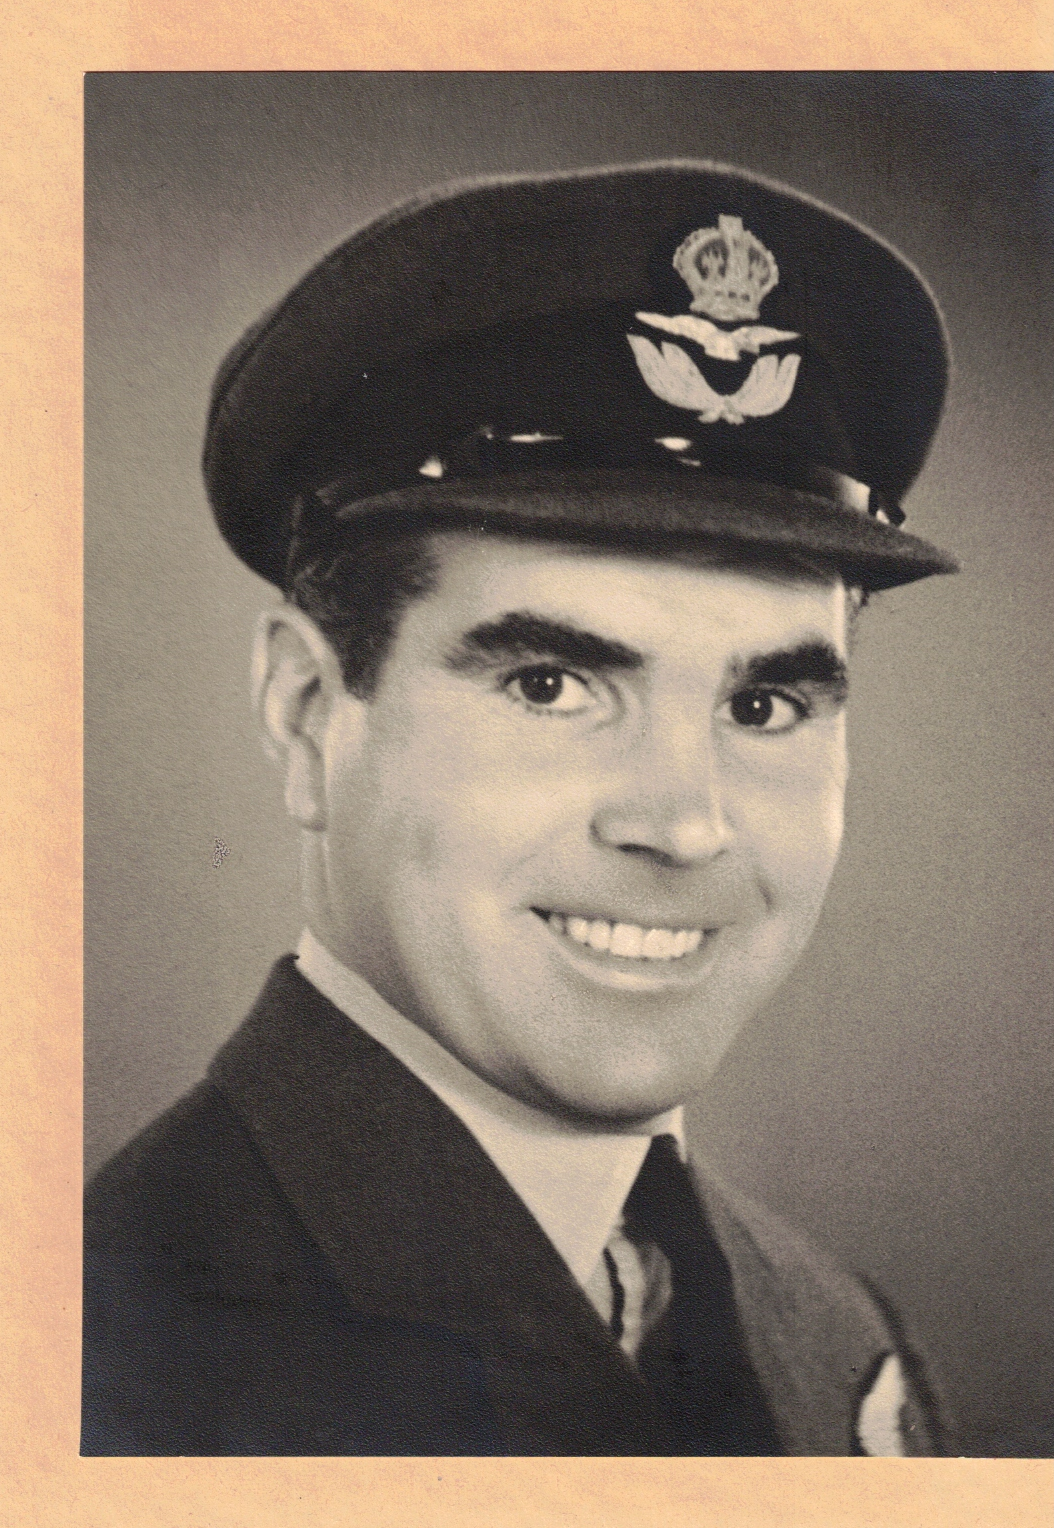 Black and white scan of Squadron Leader Stanley Booker.